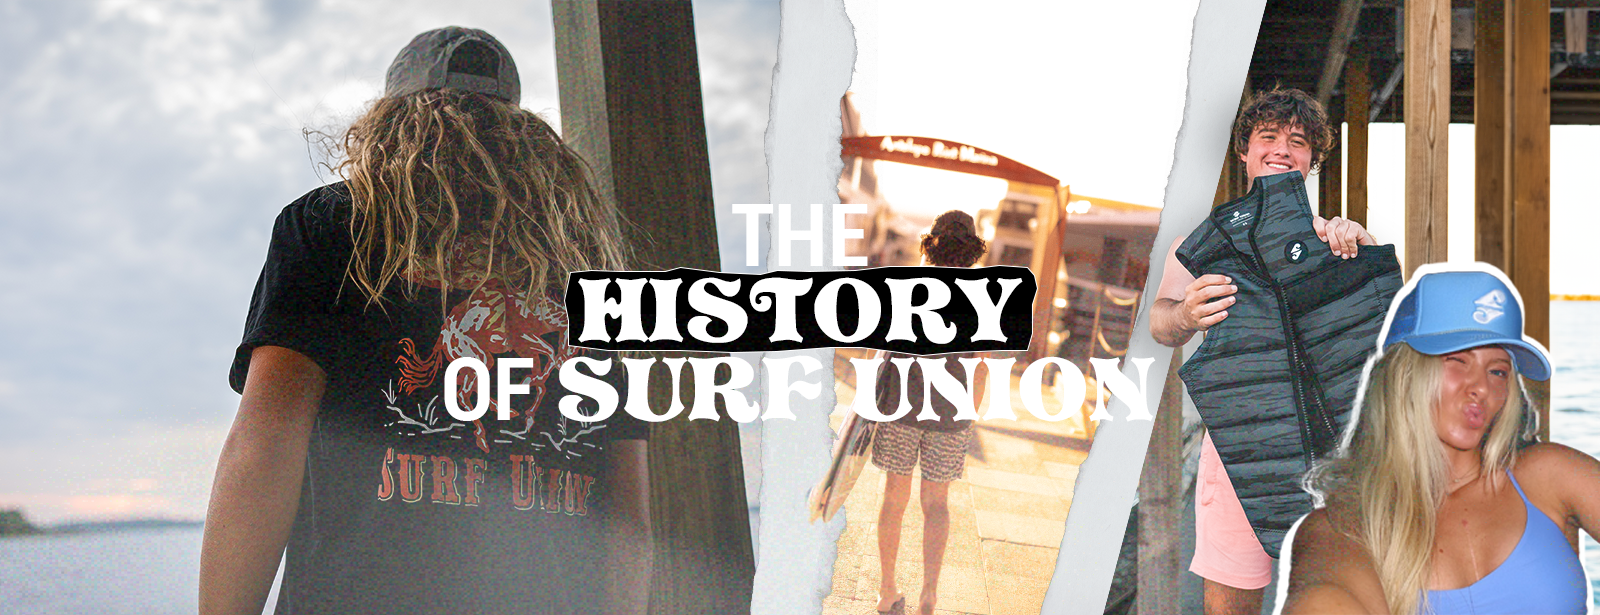 History of Surf Union.png__PID:7de06bc6-6dff-4a7b-8ee2-9bede88278a8